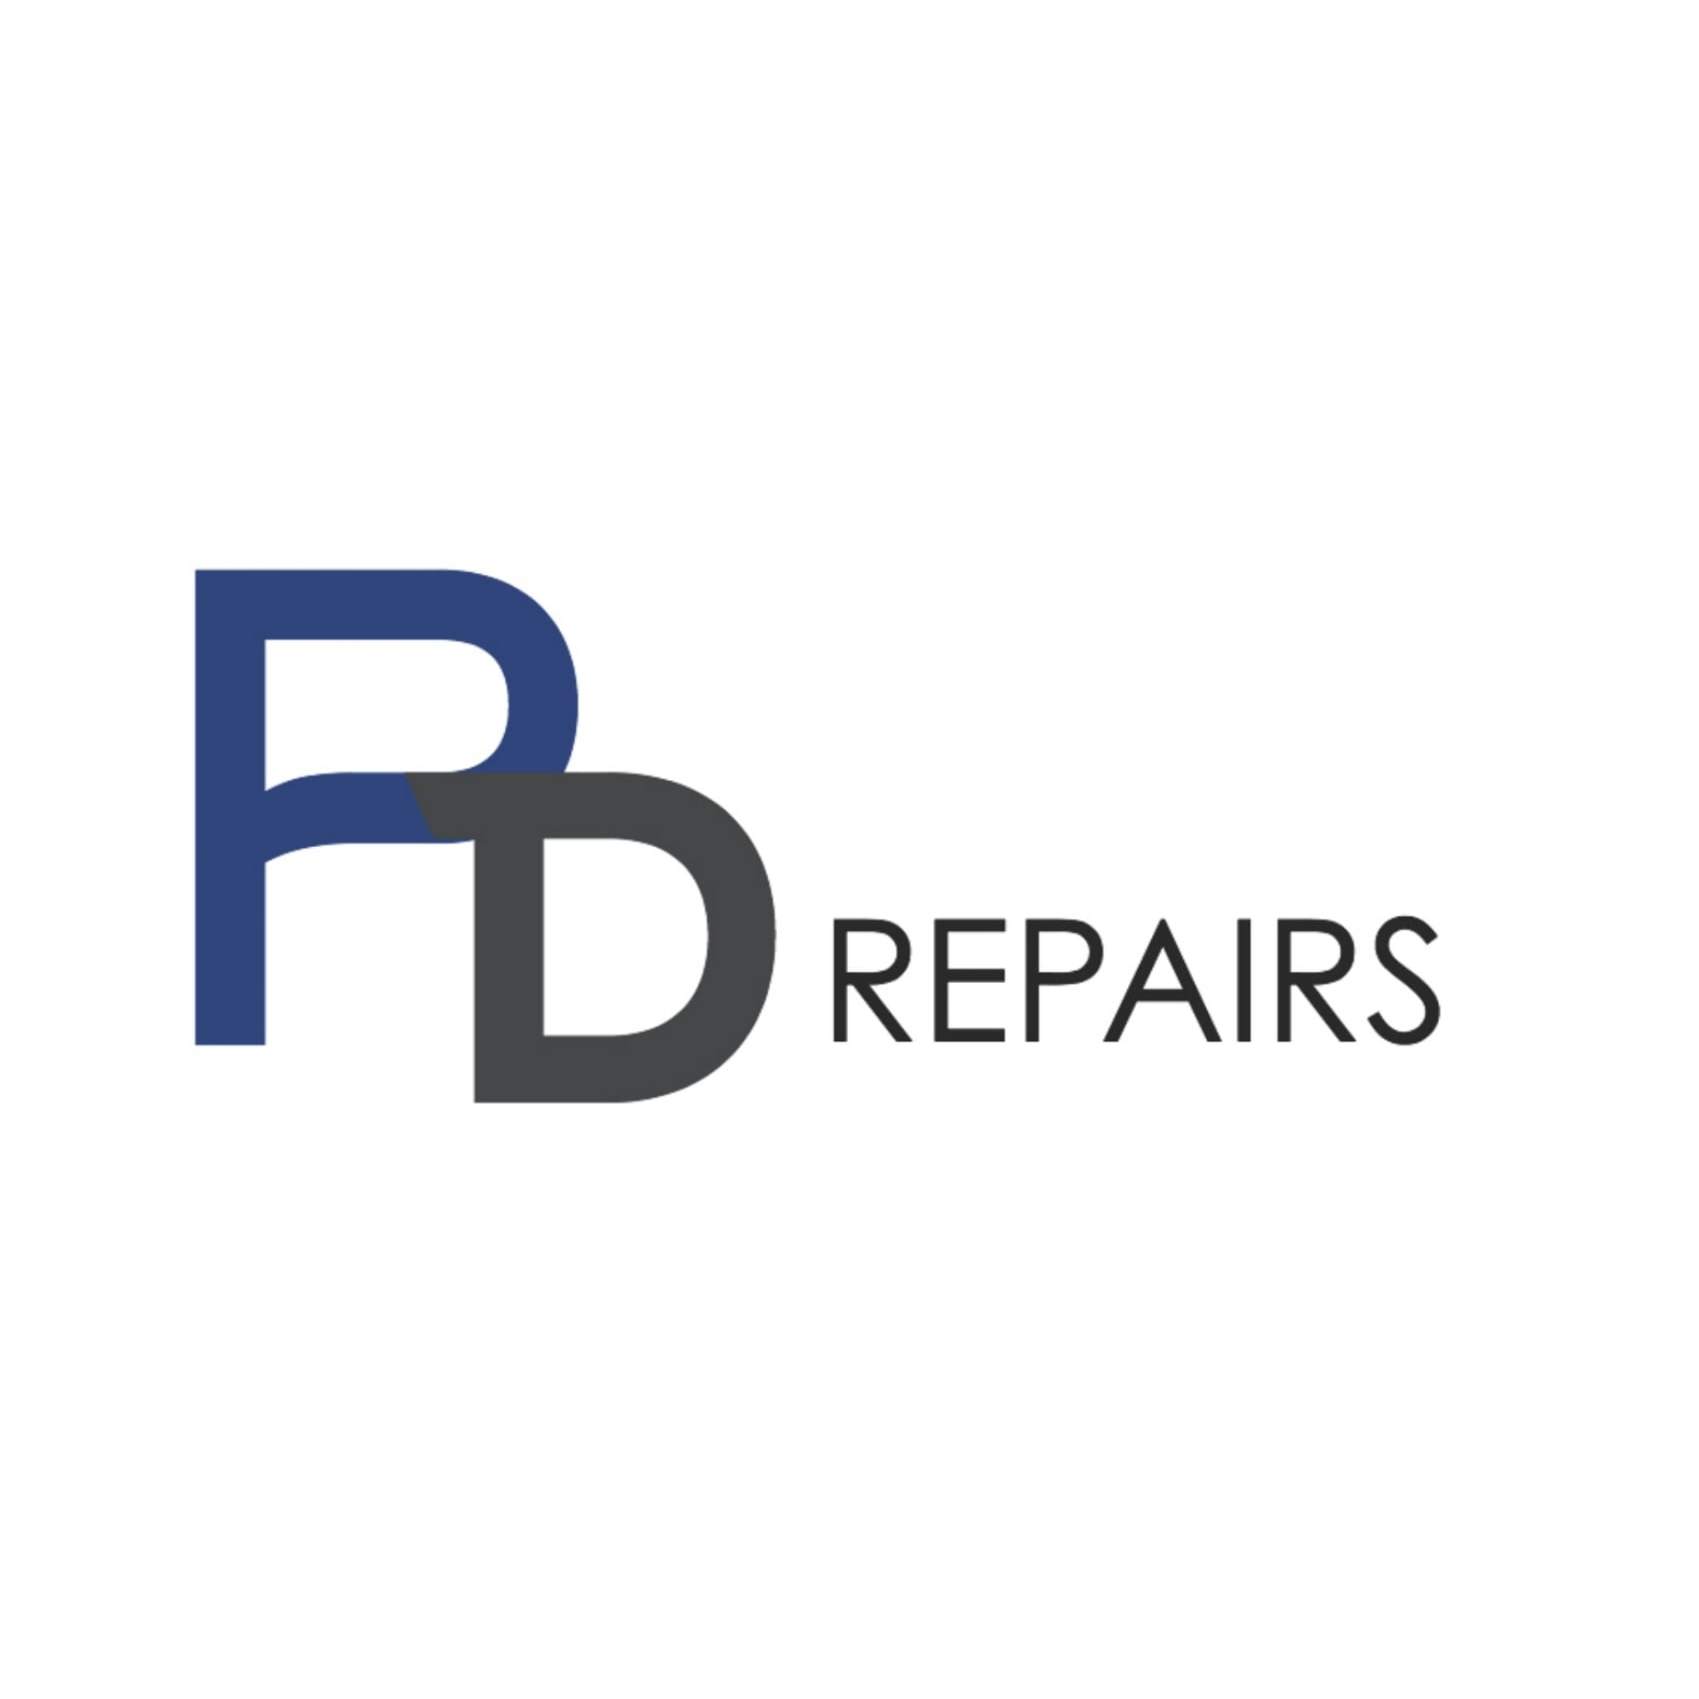 Paintless Dent Repairs - Bromsgrove, Worcestershire B61 9HJ - 07876 706086 | ShowMeLocal.com